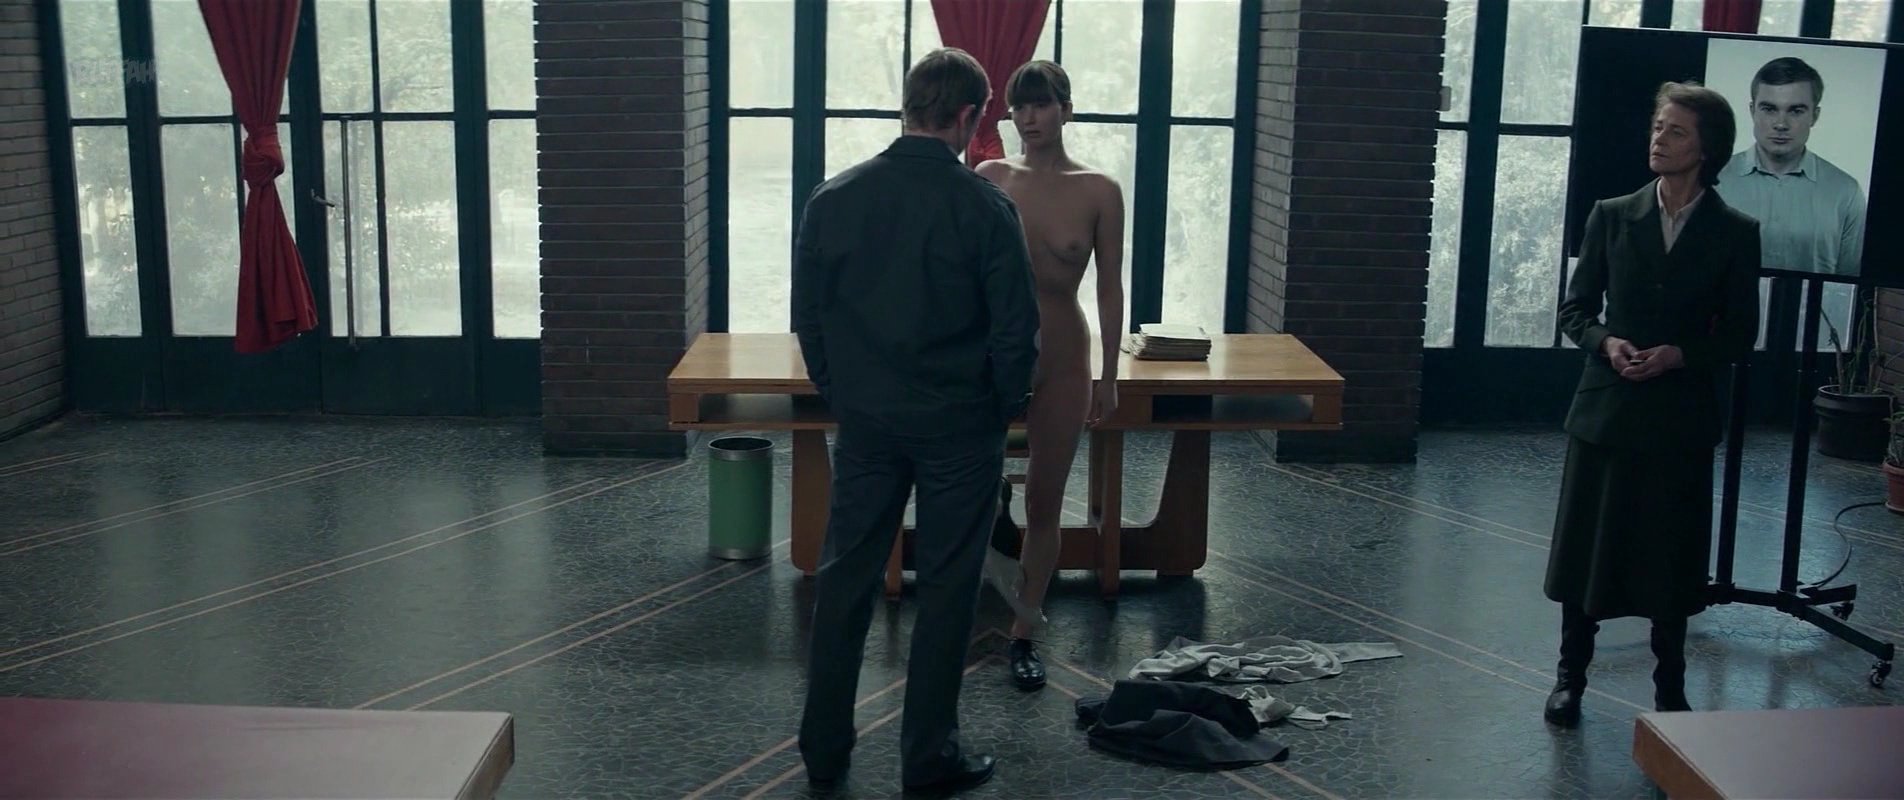 Jennifer Lawrence nude - Red Sparrow (2018)